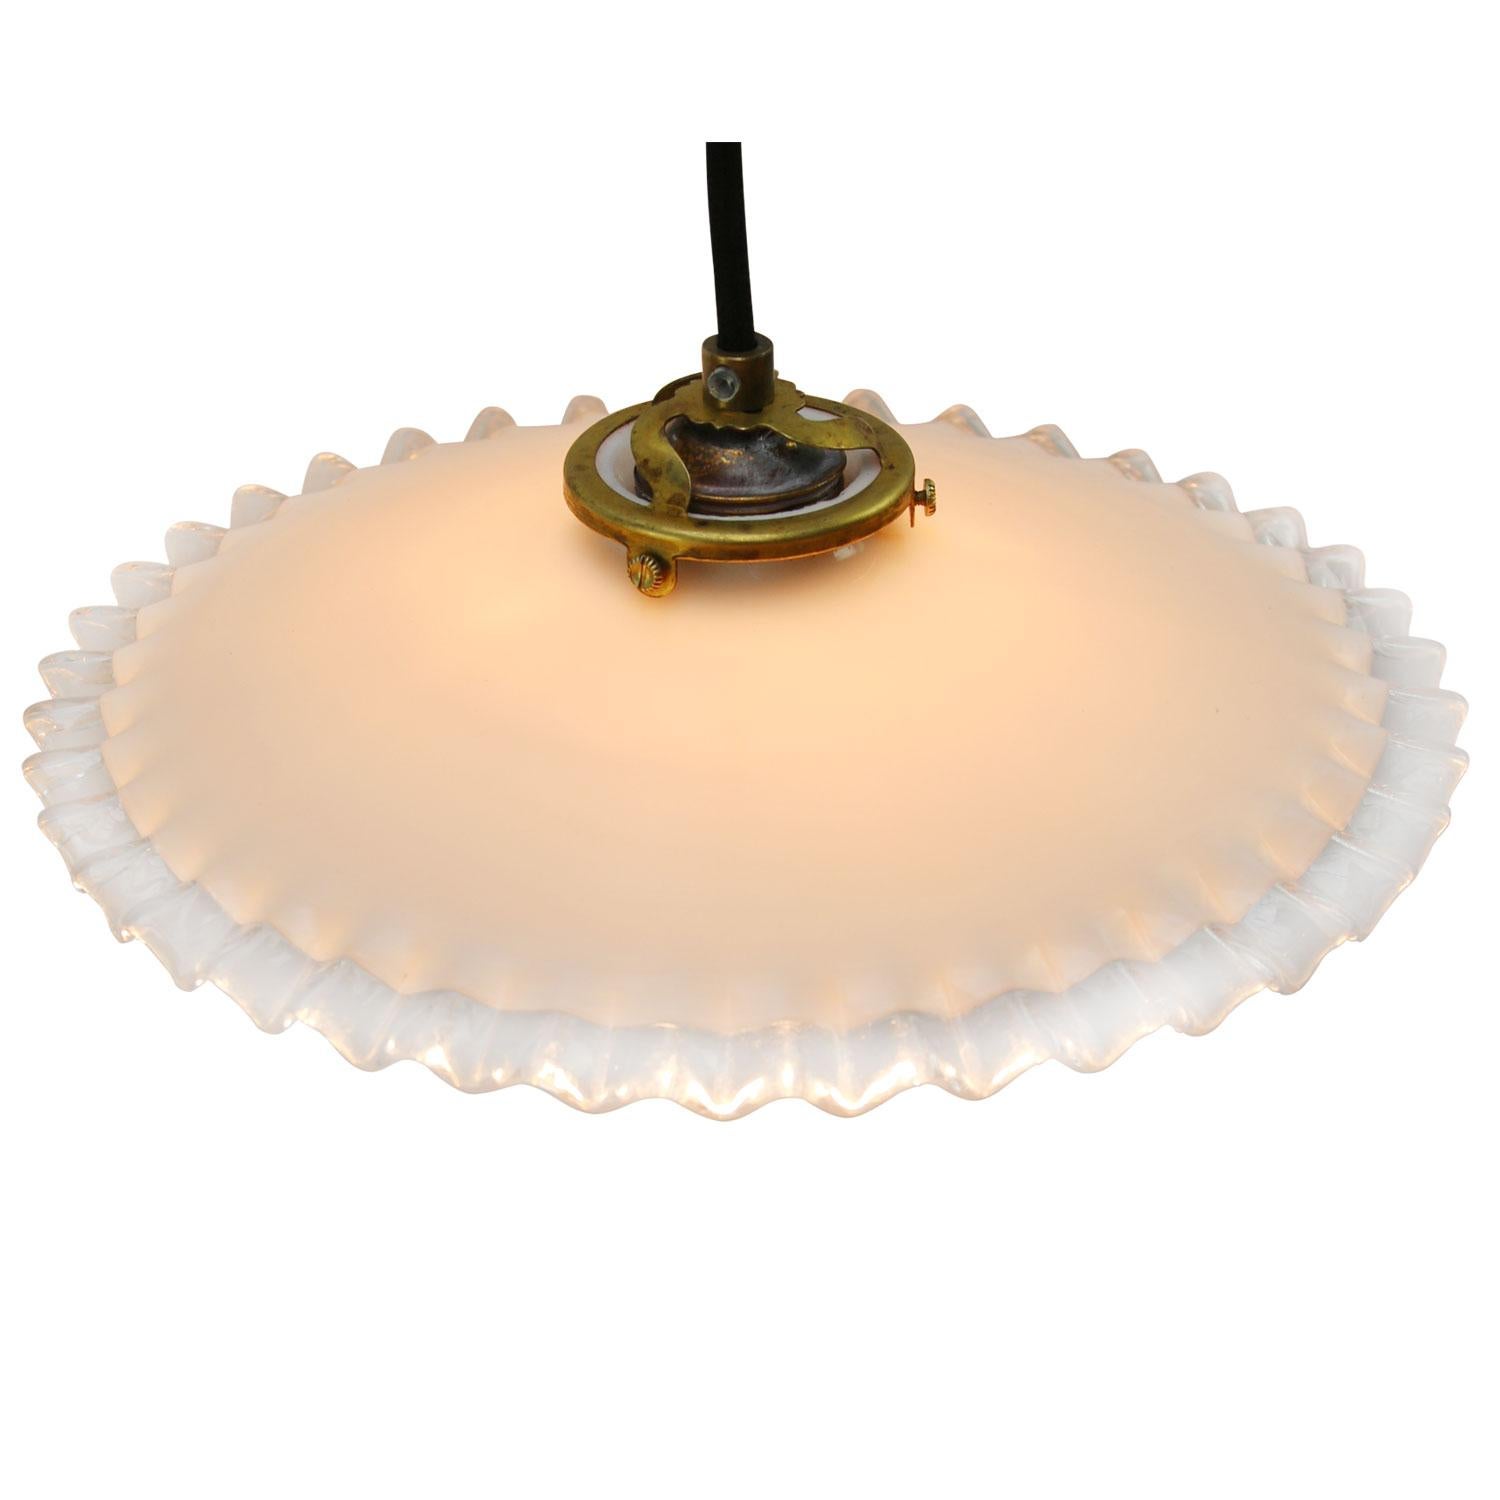 French opaline glass Industrial pendant. 

Weight 0.70 kg / 1.5 lb

Priced per individual item. All lamps have been made suitable by international standards for incandescent light bulbs, energy-efficient and LED bulbs. E26/E27 bulb holders and new